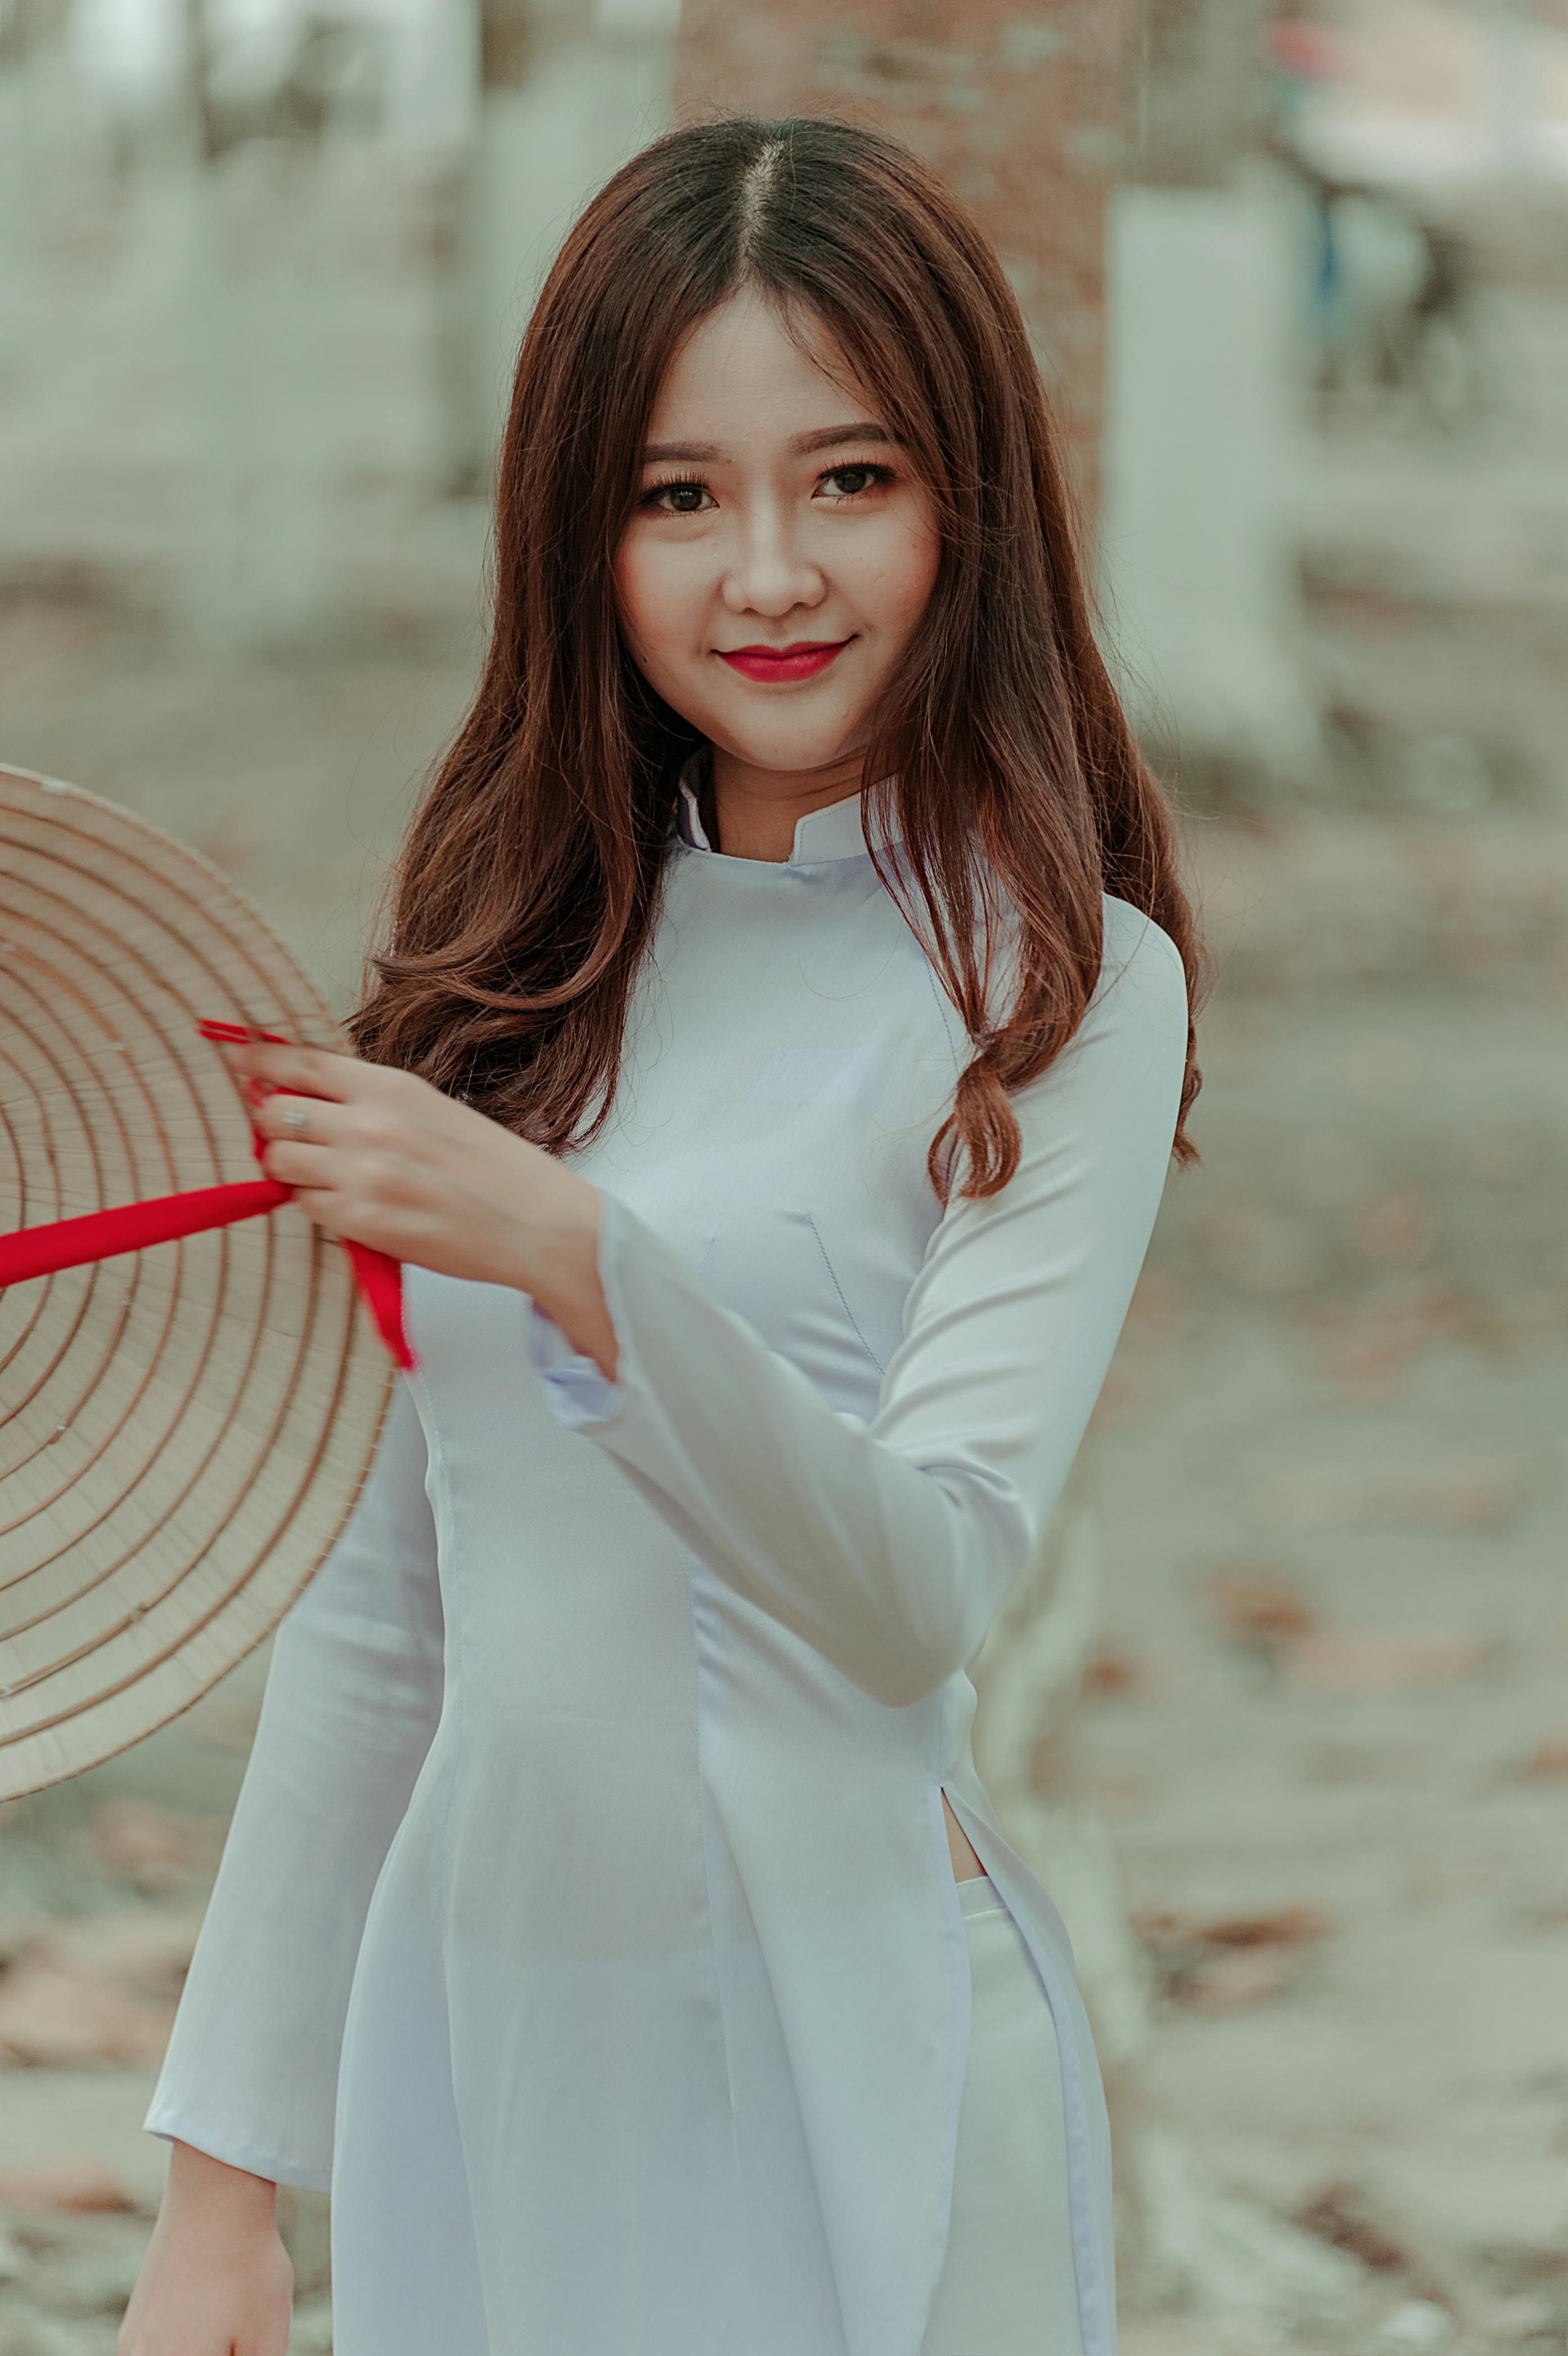 Woman Wearing White Long-sleeved Dress Holding Straw Hat · Free Stock Photo